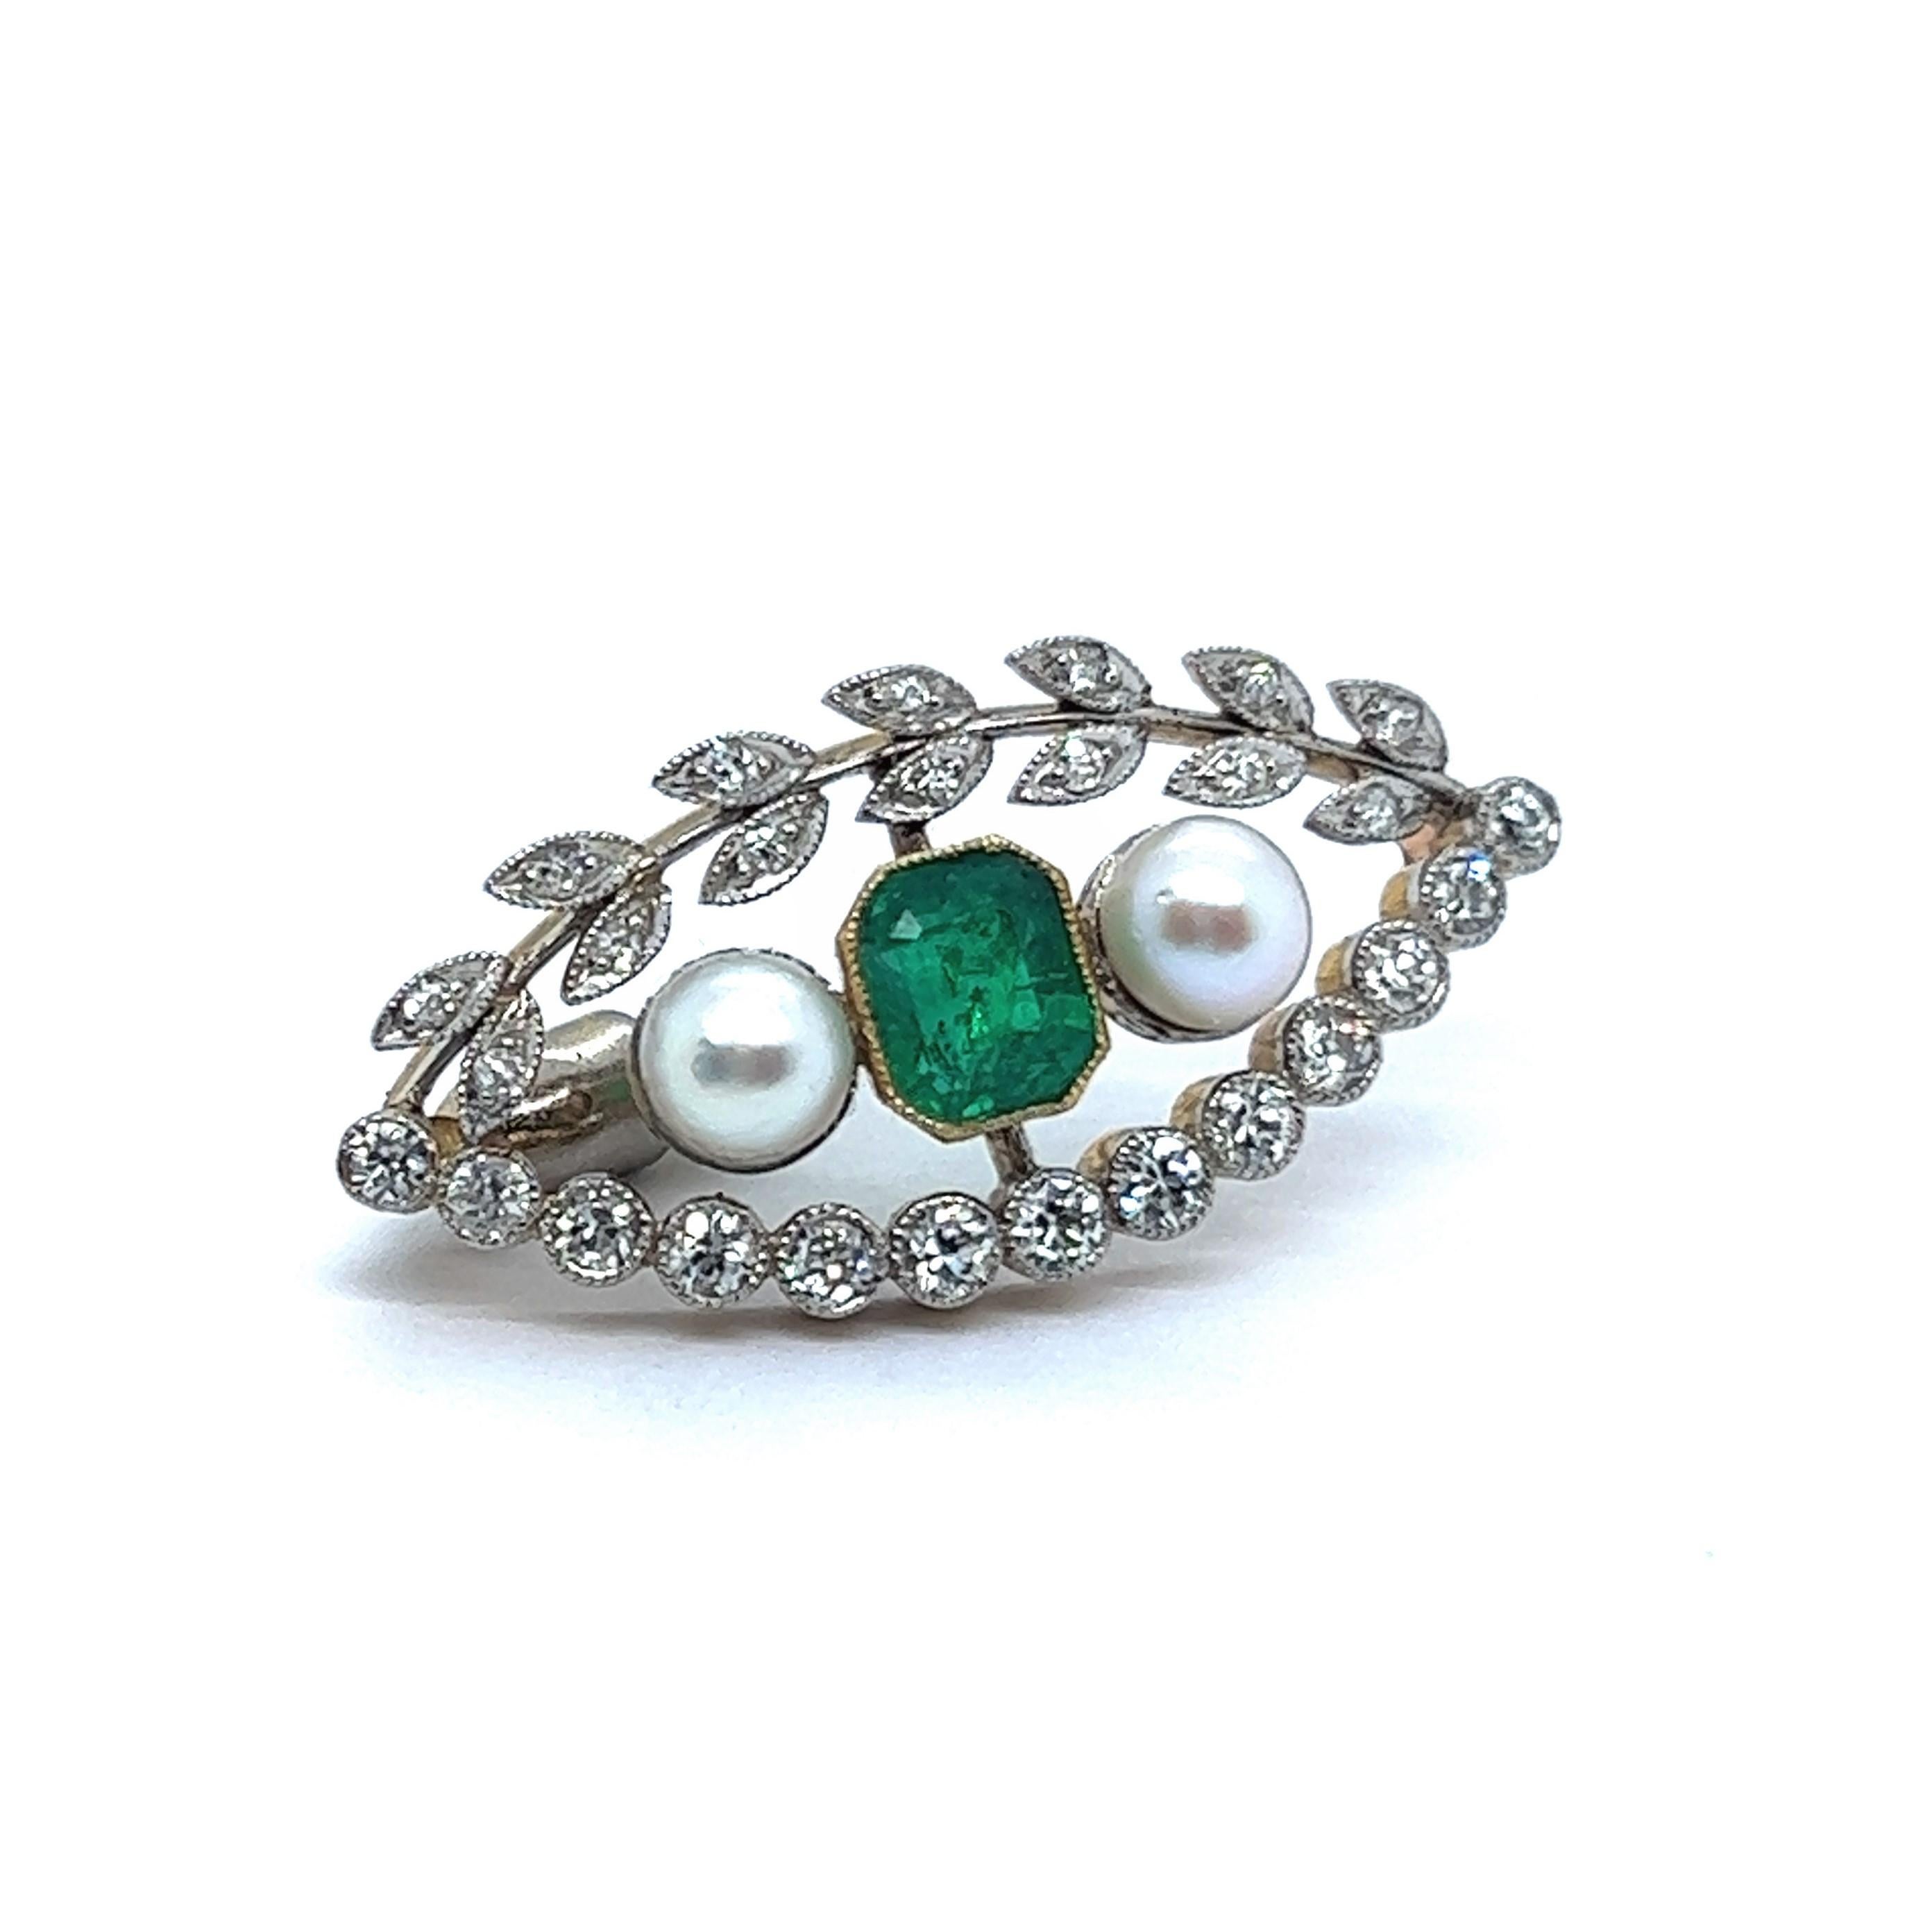 Old European Cut Charming Antique Brooch with Emerald and Old Cut Diamonds  For Sale